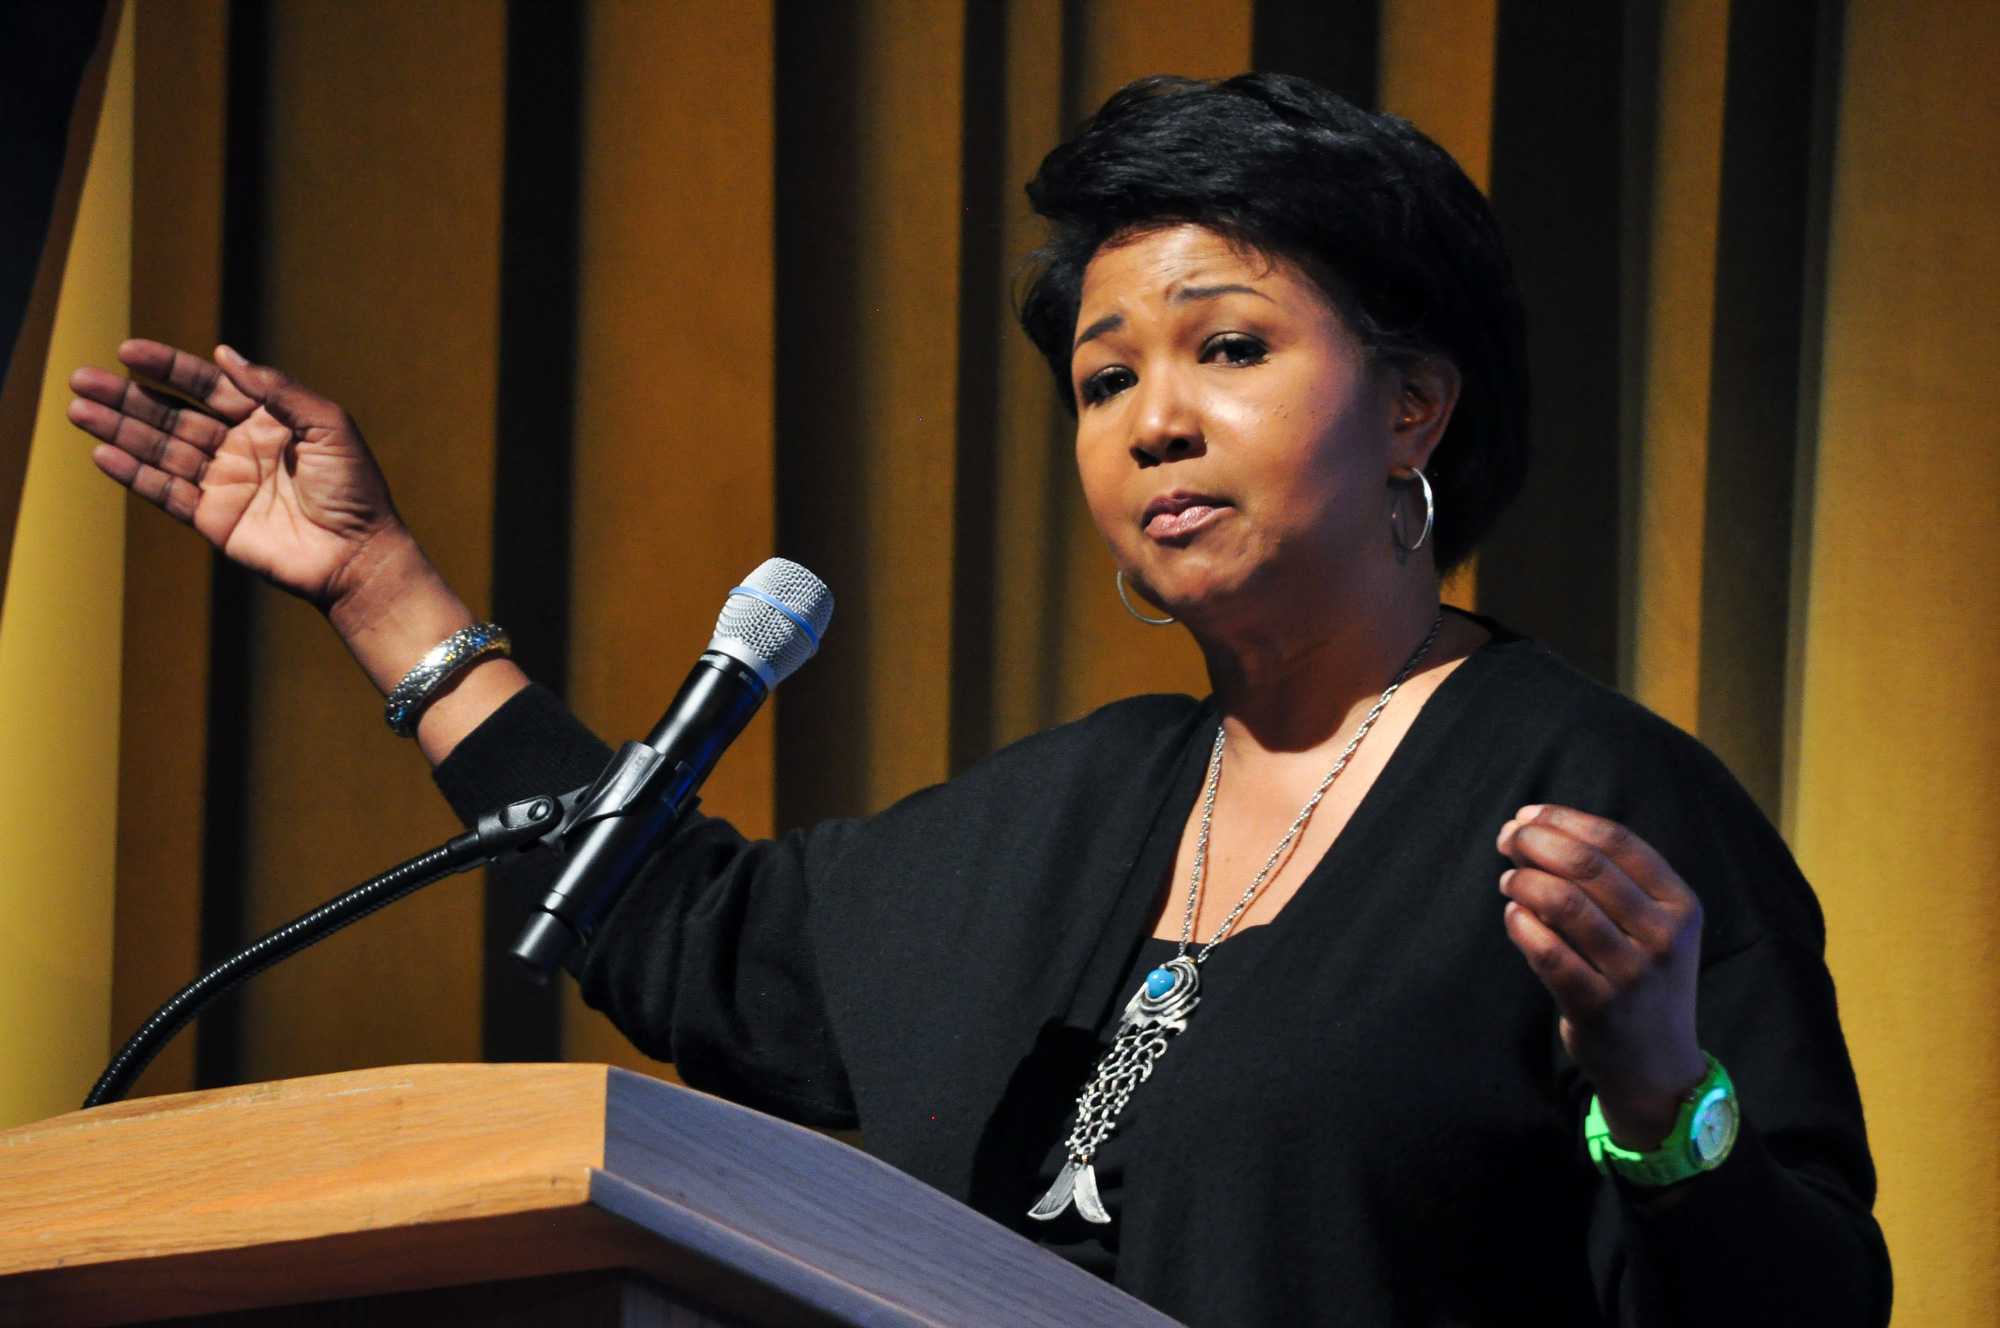 Mae Jemison, who became the first African-American woman to travel in space, speaks at Appalachian State University in Schaefer Center on March 30. Photo by Monique Rivera.